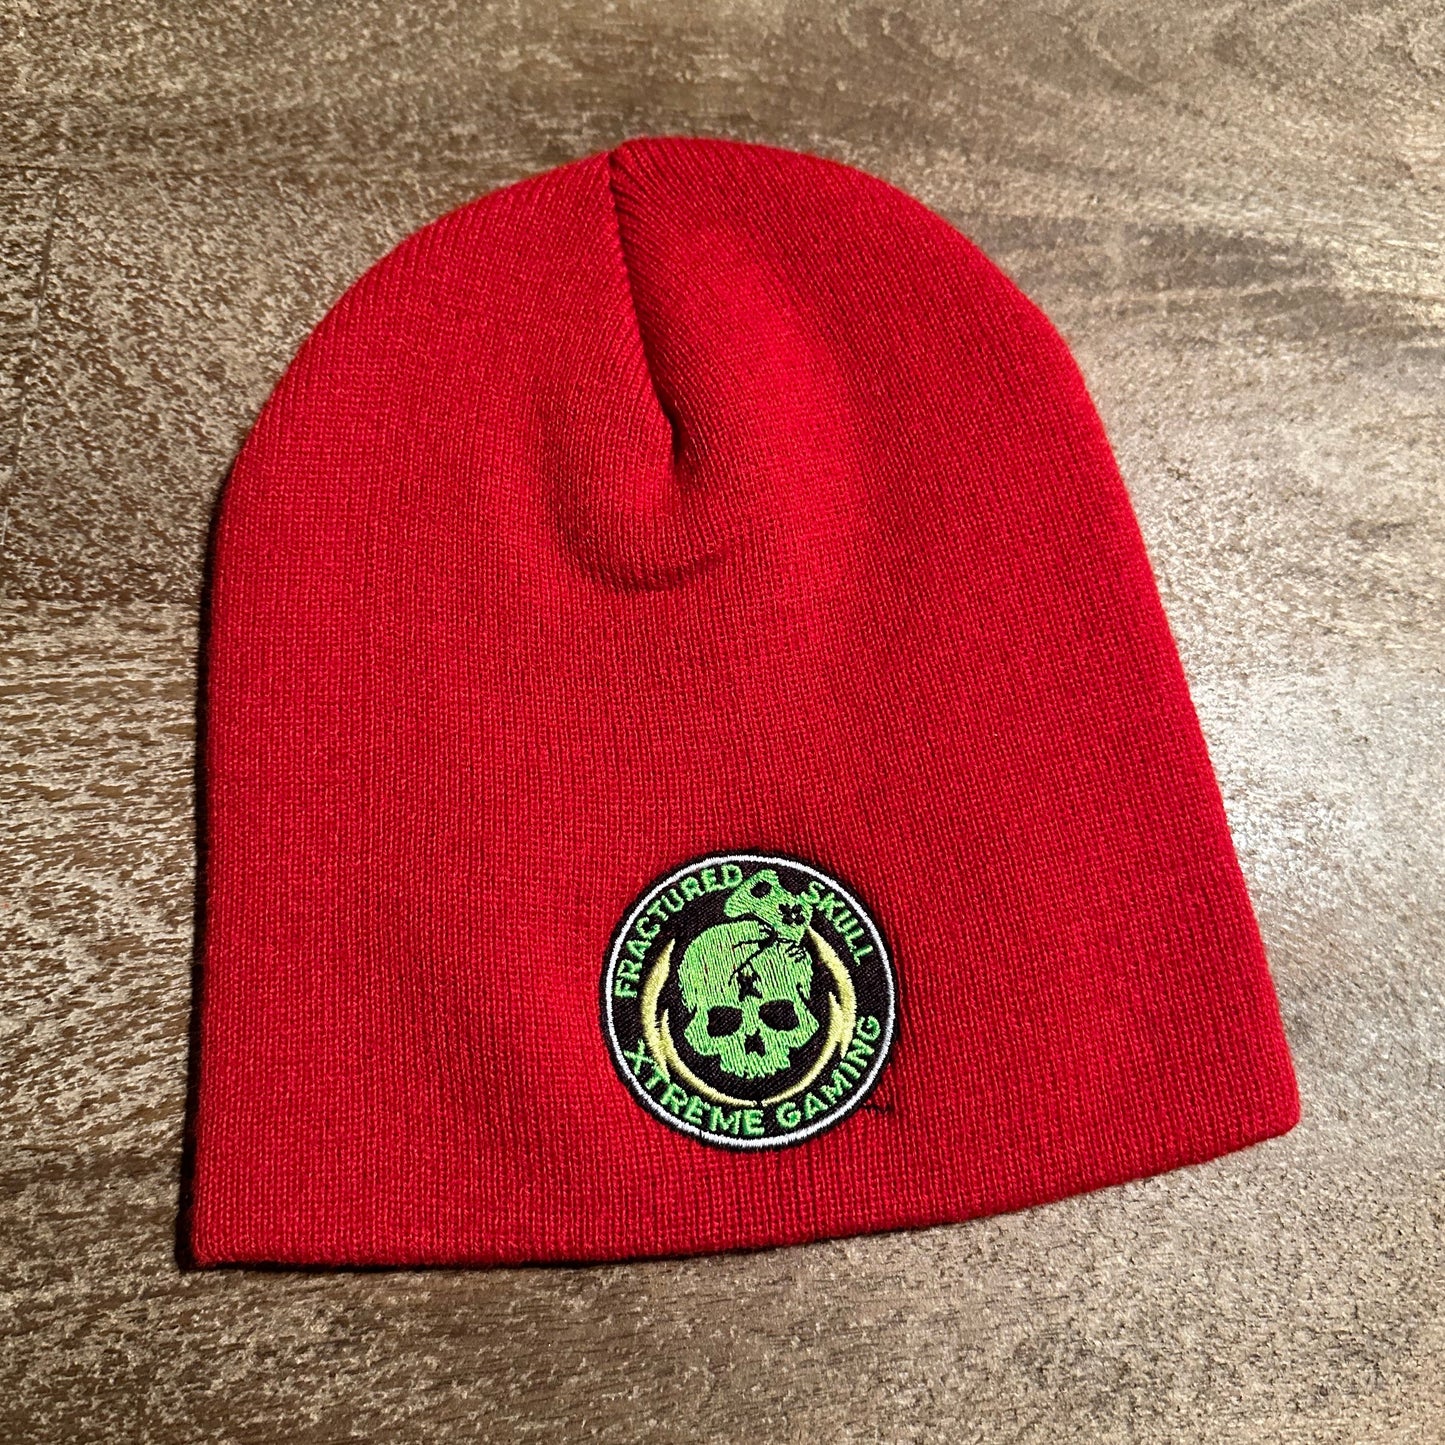 Fractured Skull Xtreme Embroidered Logo Beanie on Red